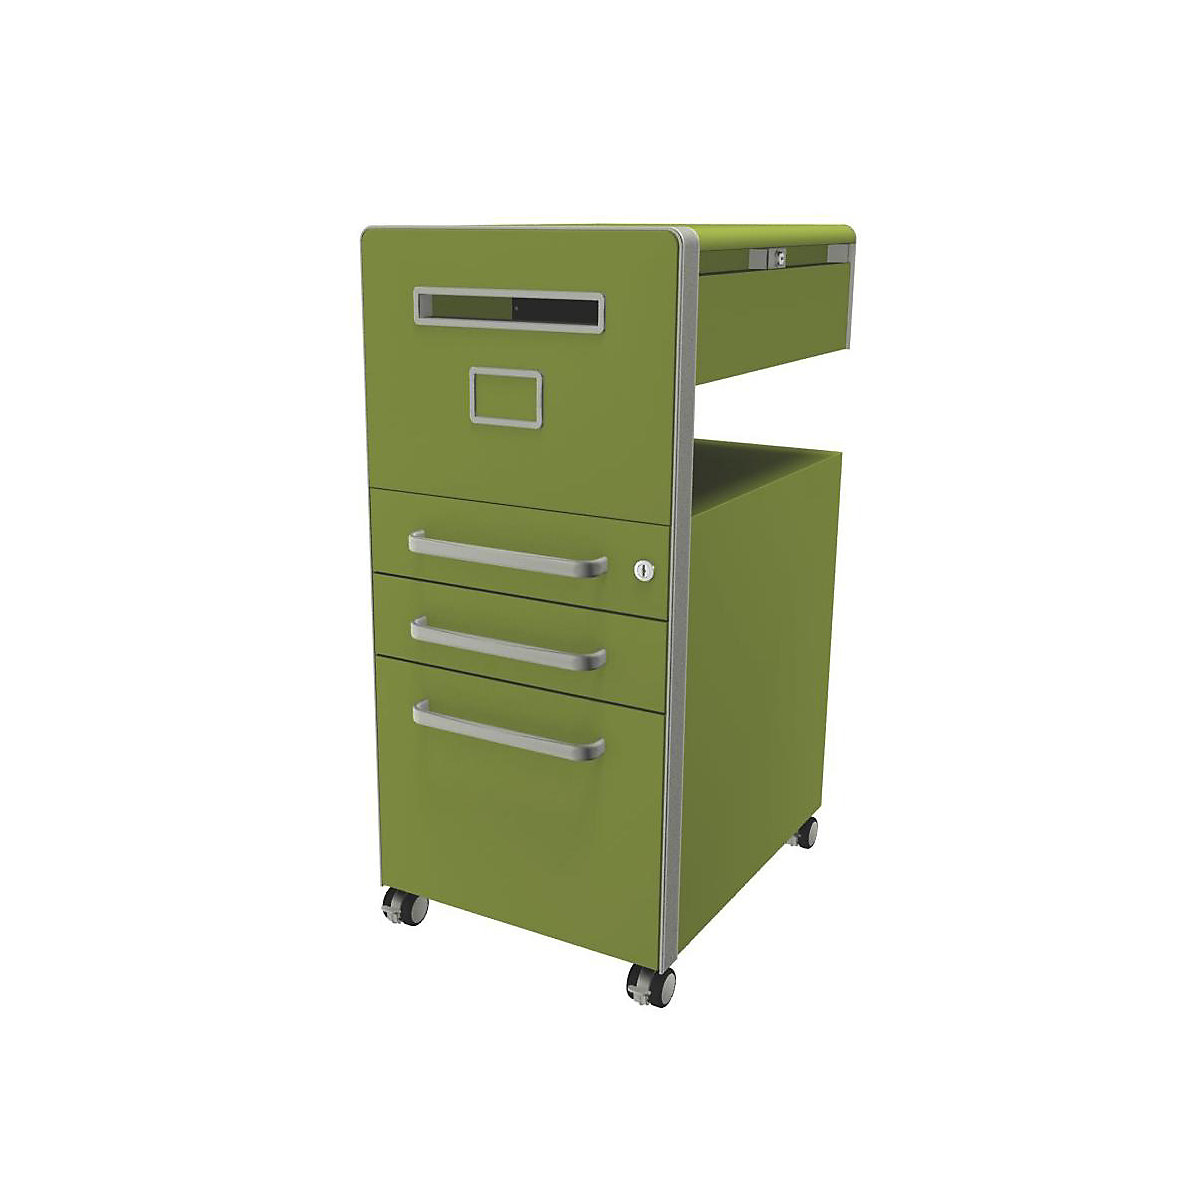 Bite™ pedestal furniture, with 1 whiteboard, opens on the left side – BISLEY, with 2 universal drawers, 1 suspension file drawer, green-31